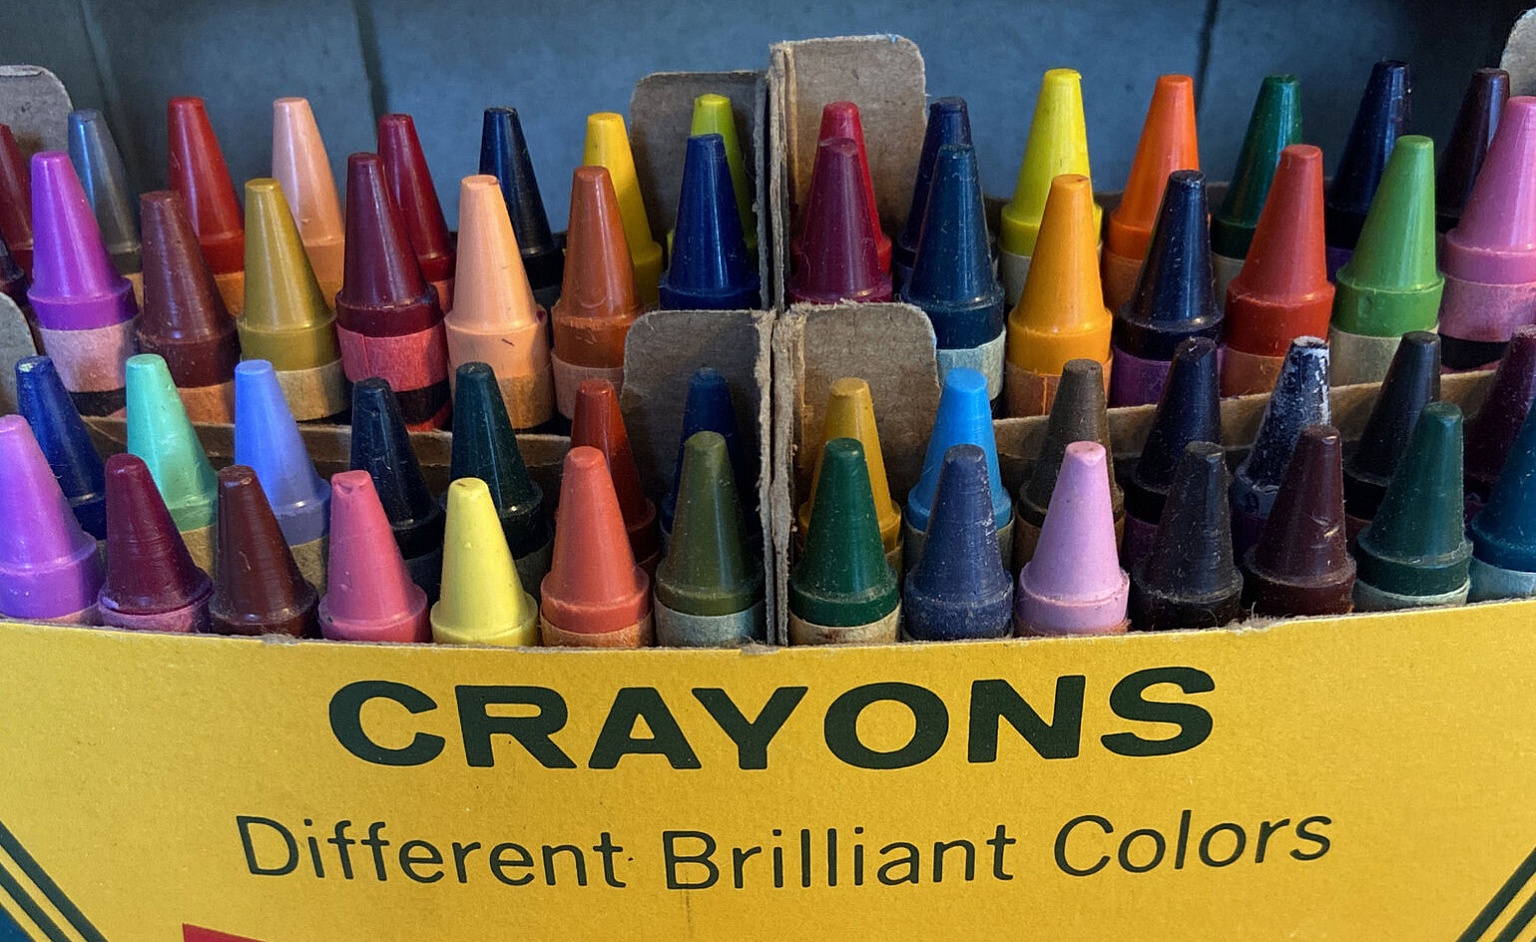 Why Does My Car Smell Like Eggs, Crayons or Other Odd Things? - eBay